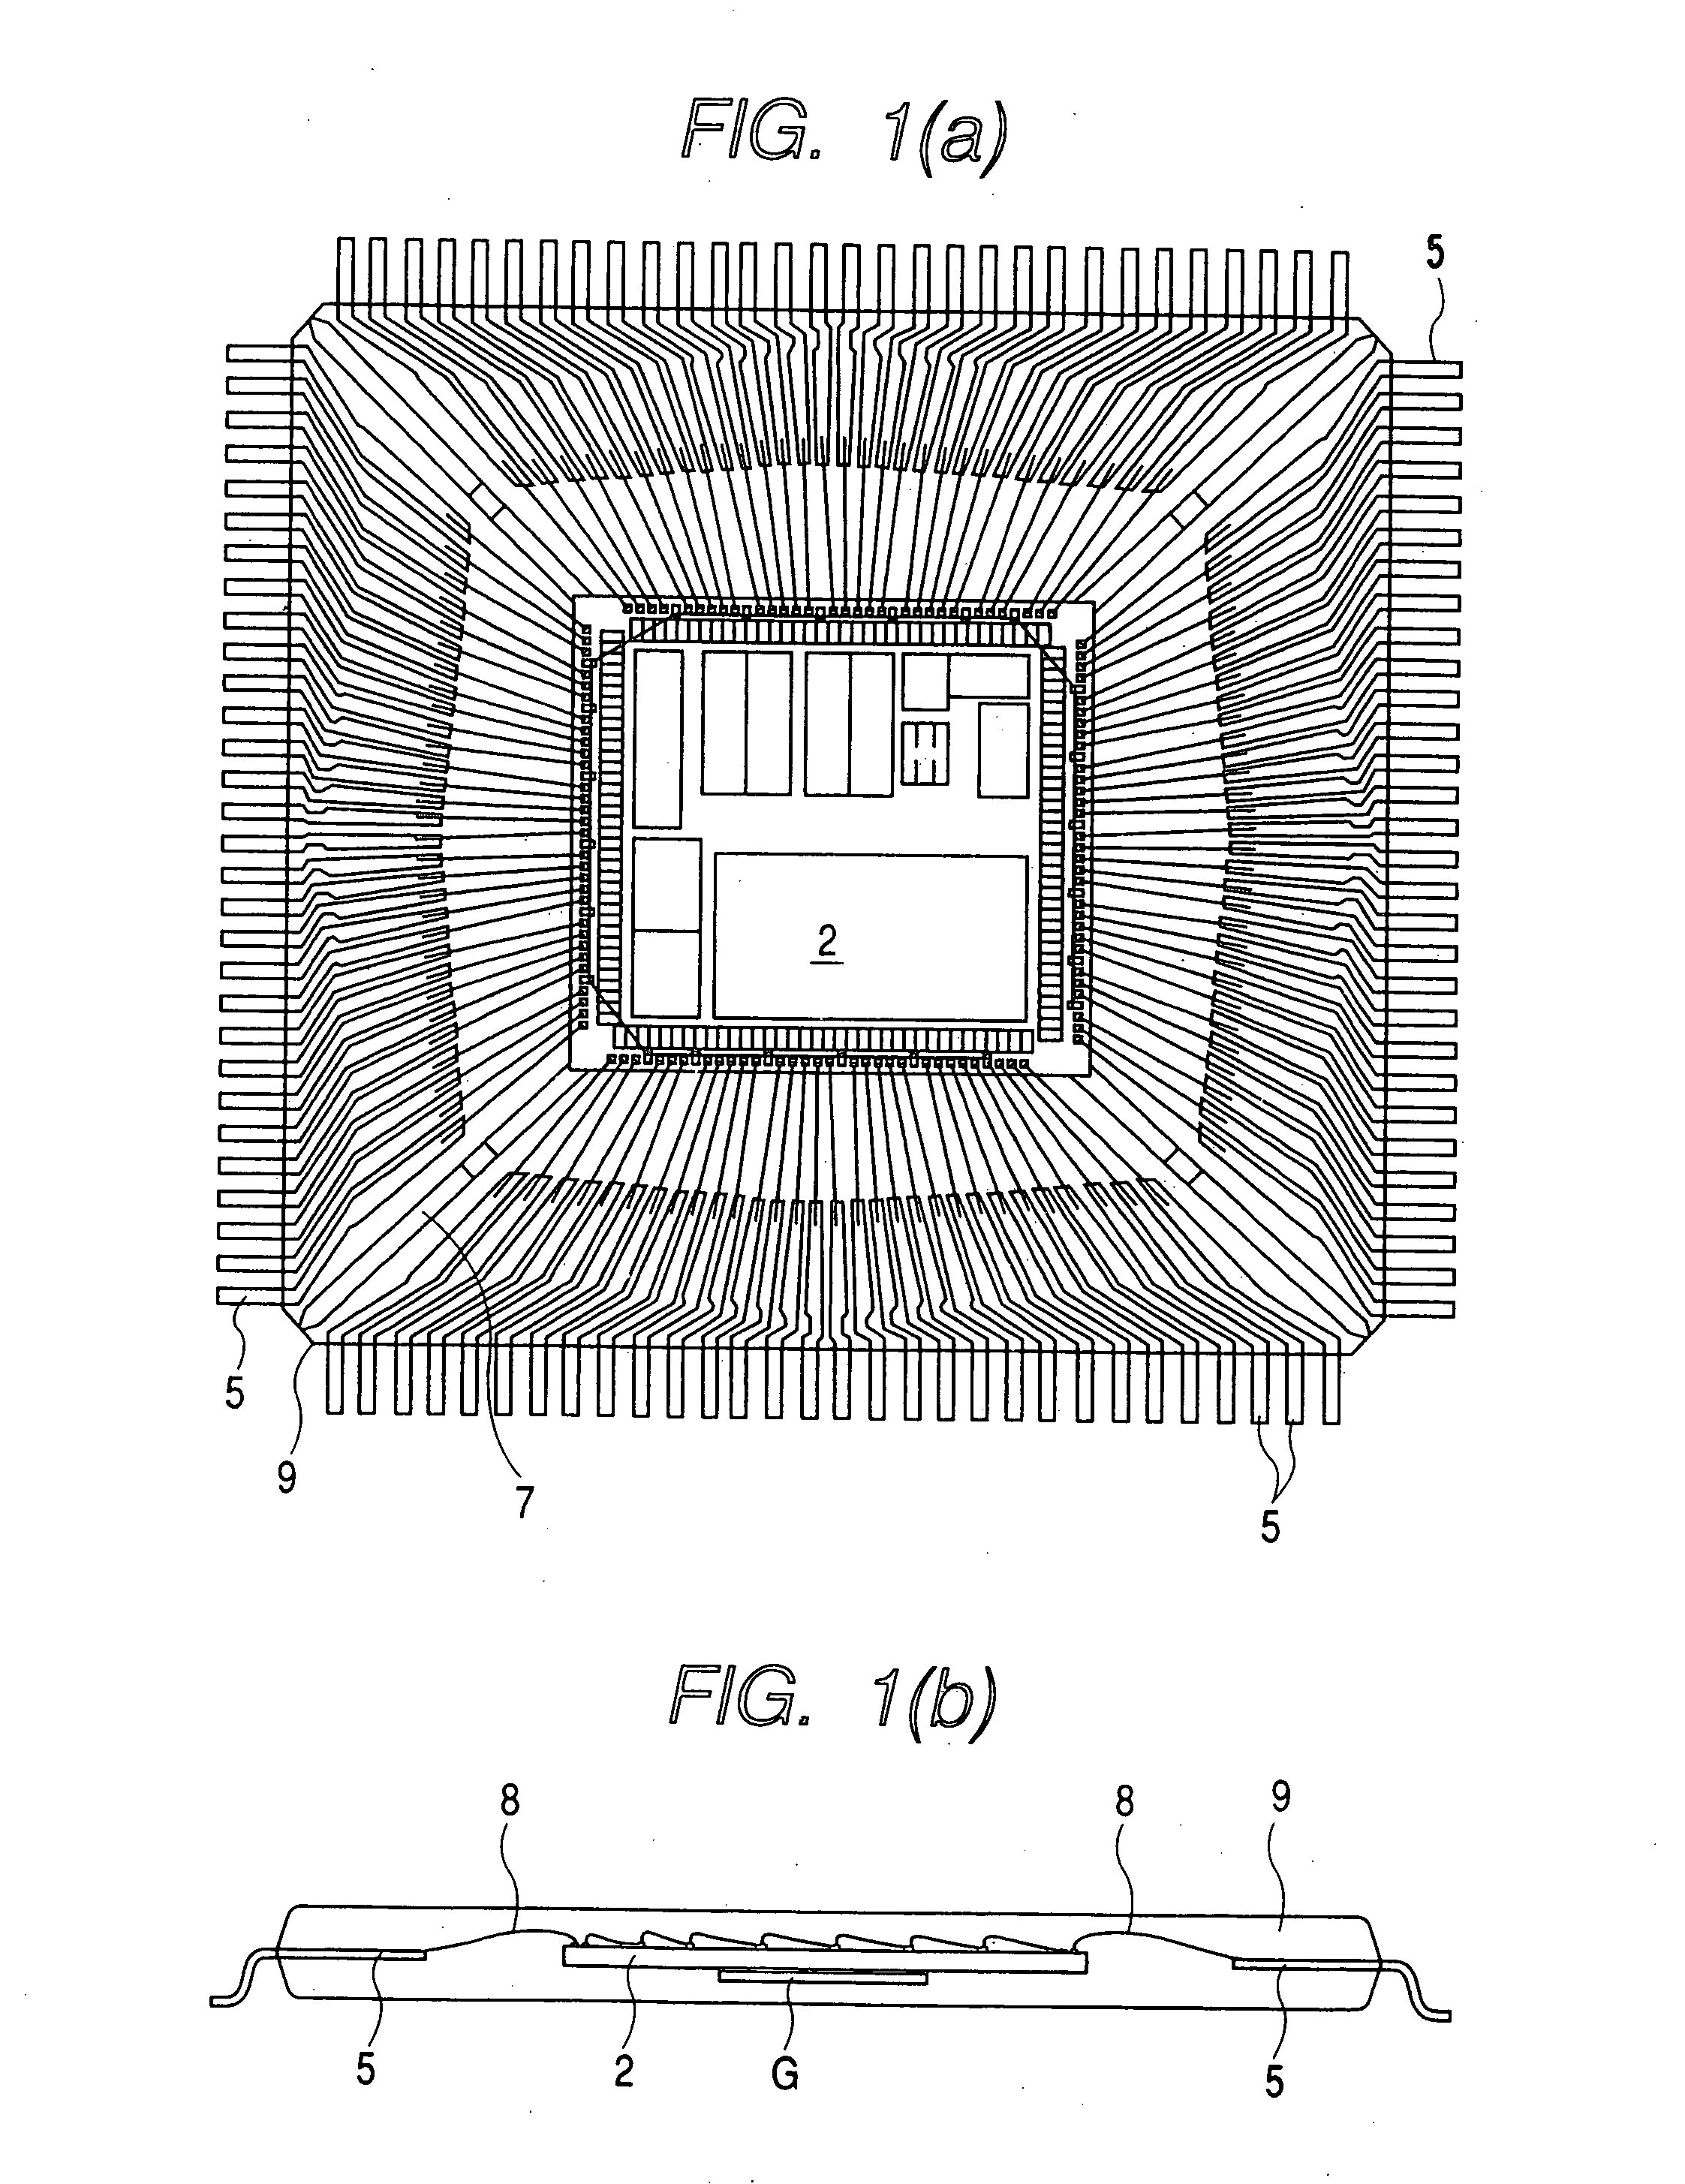 Semiconductor device having a switch circuit